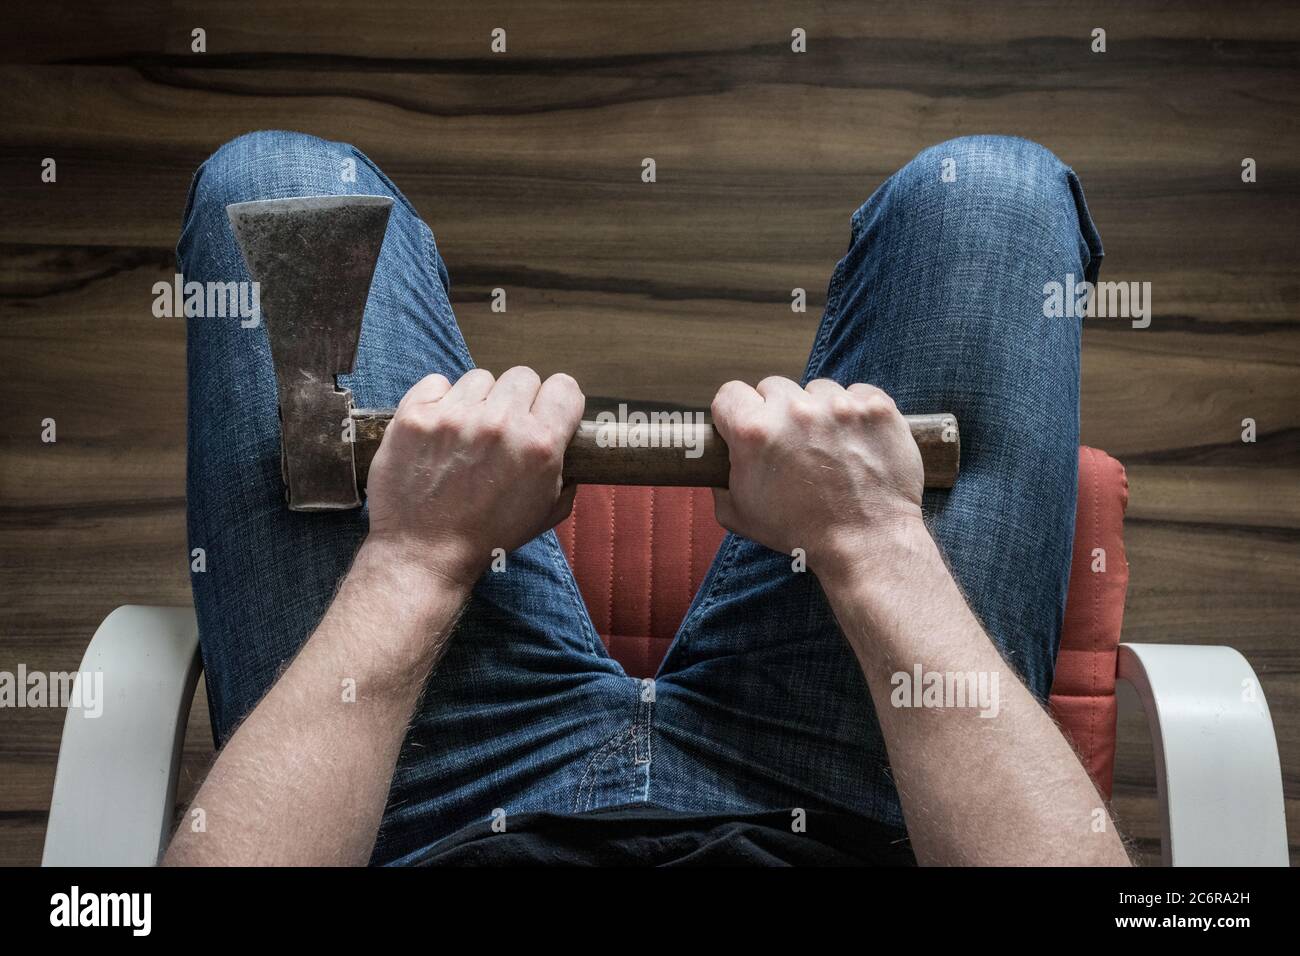 A man squeezing an ax in his knees. The concept, Domestic violence, social problems, crime Stock Photo